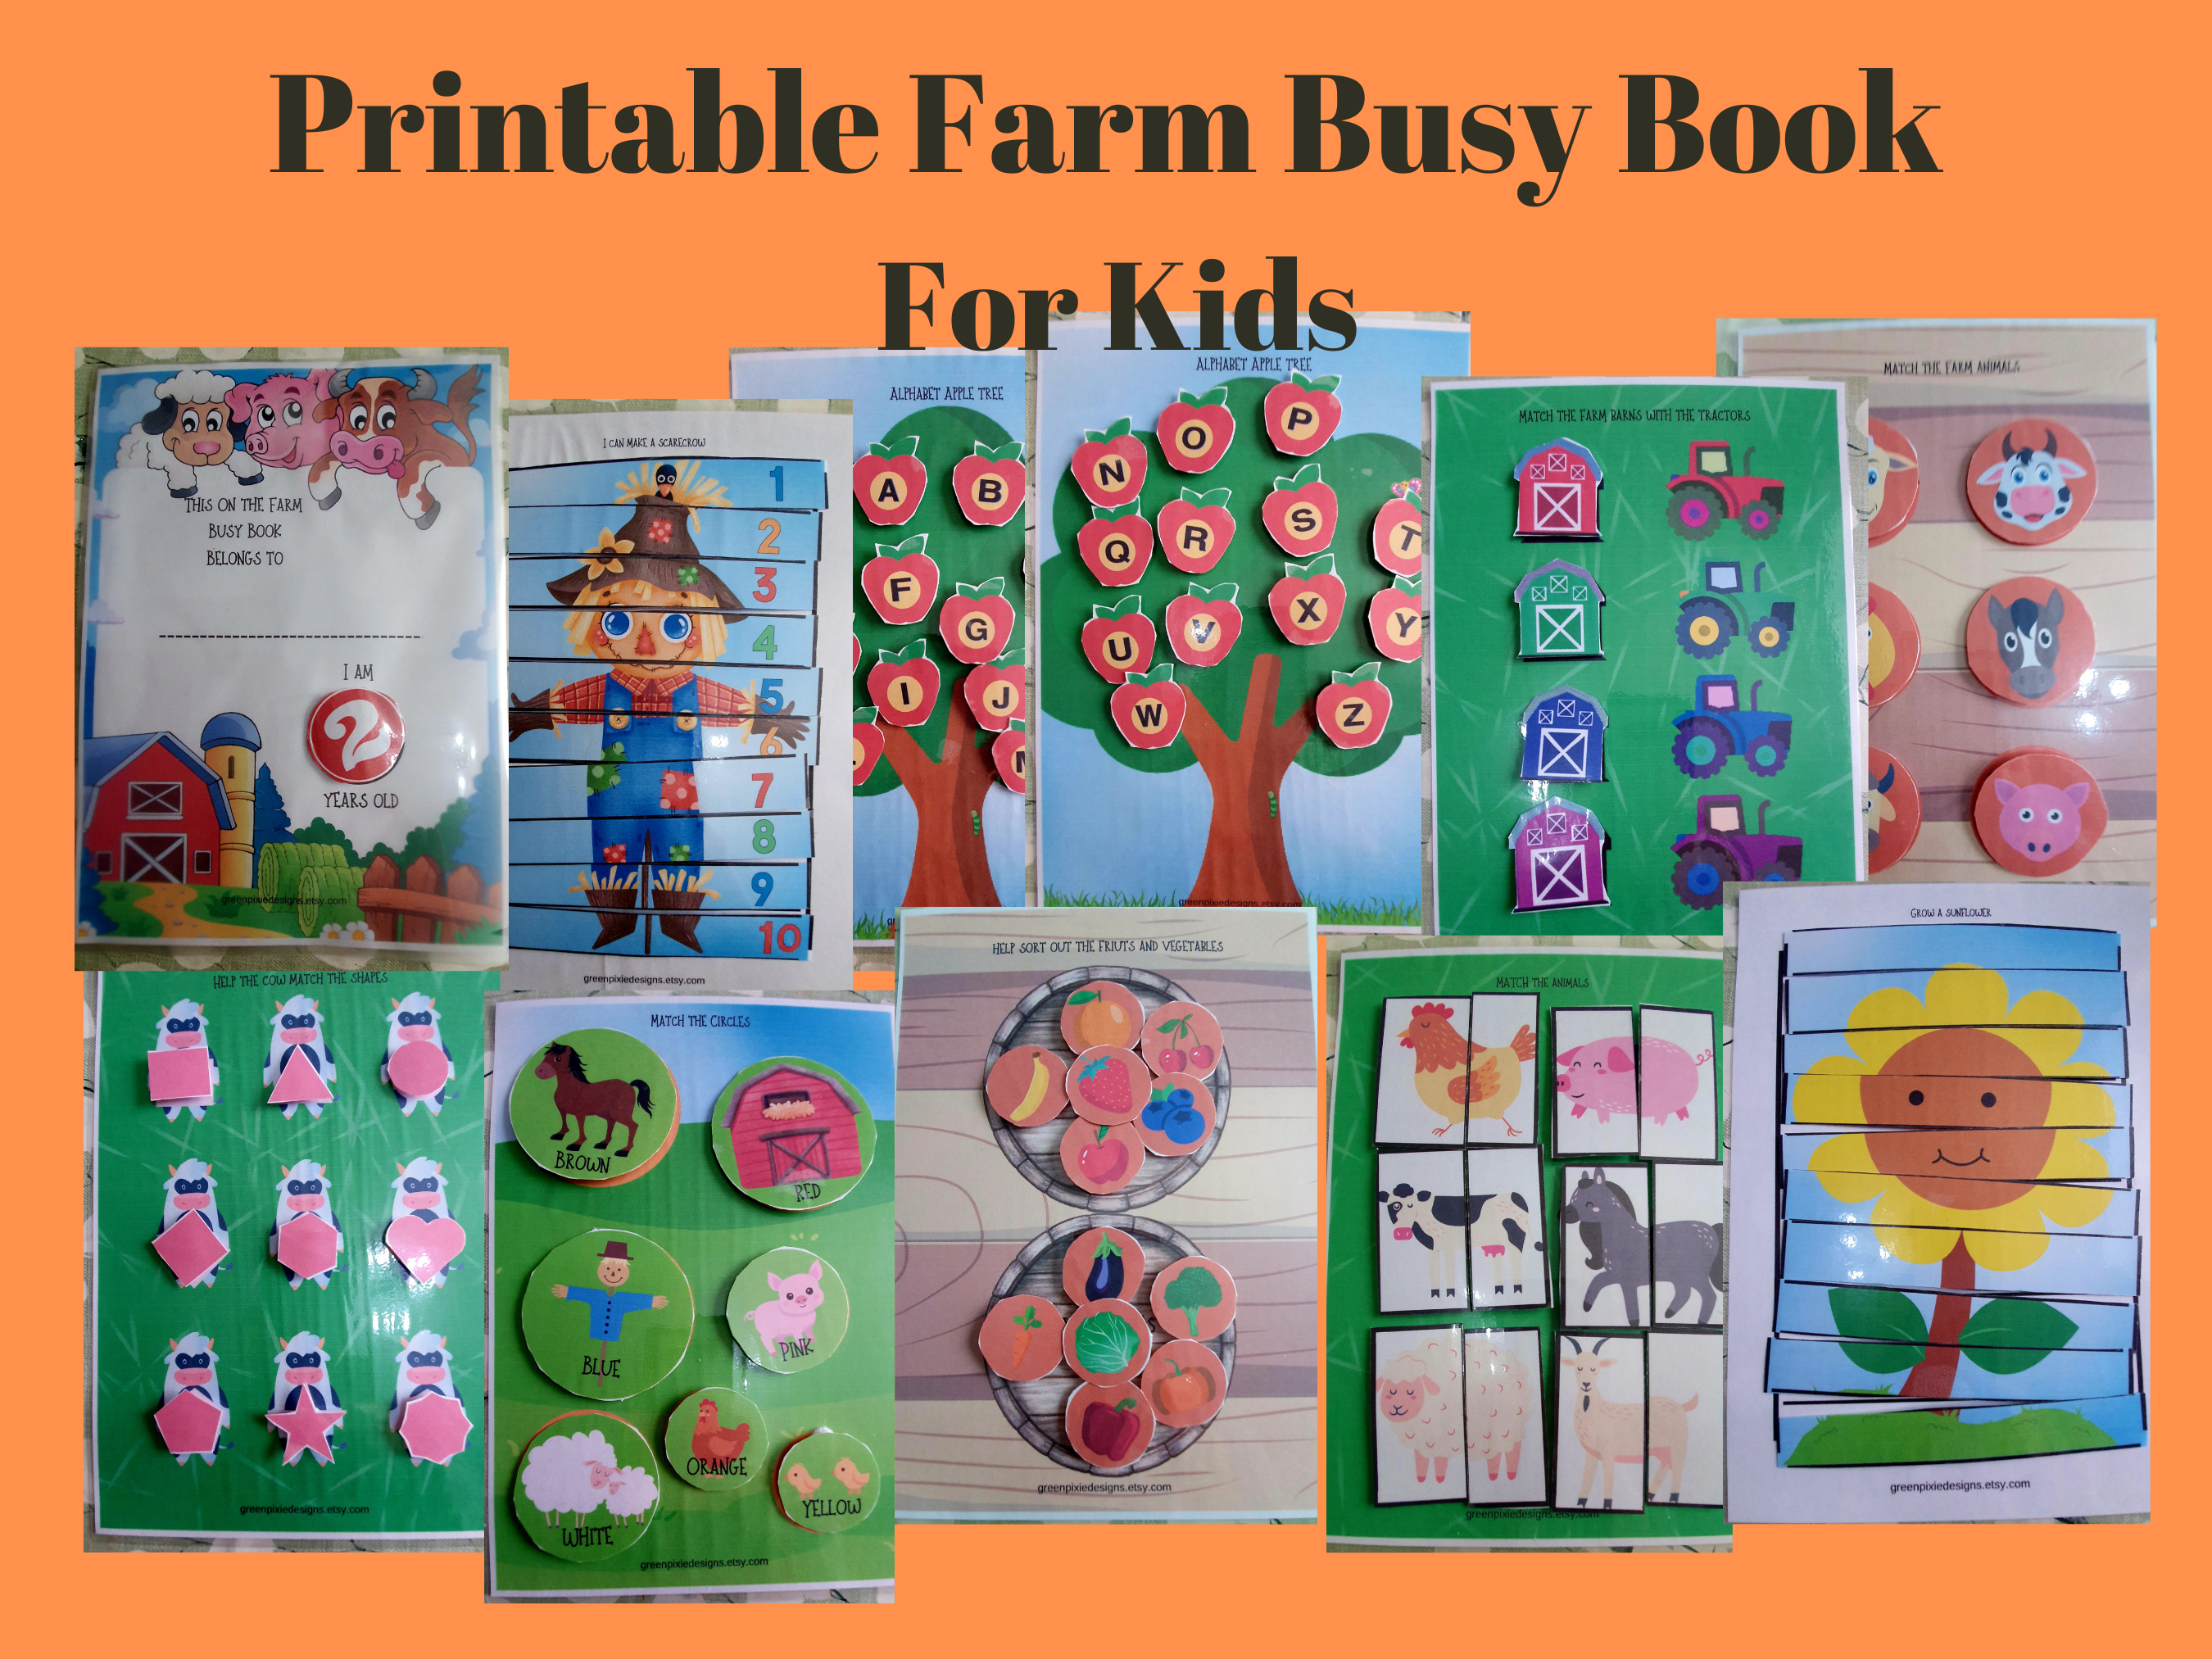 Why are busy book so great for kids